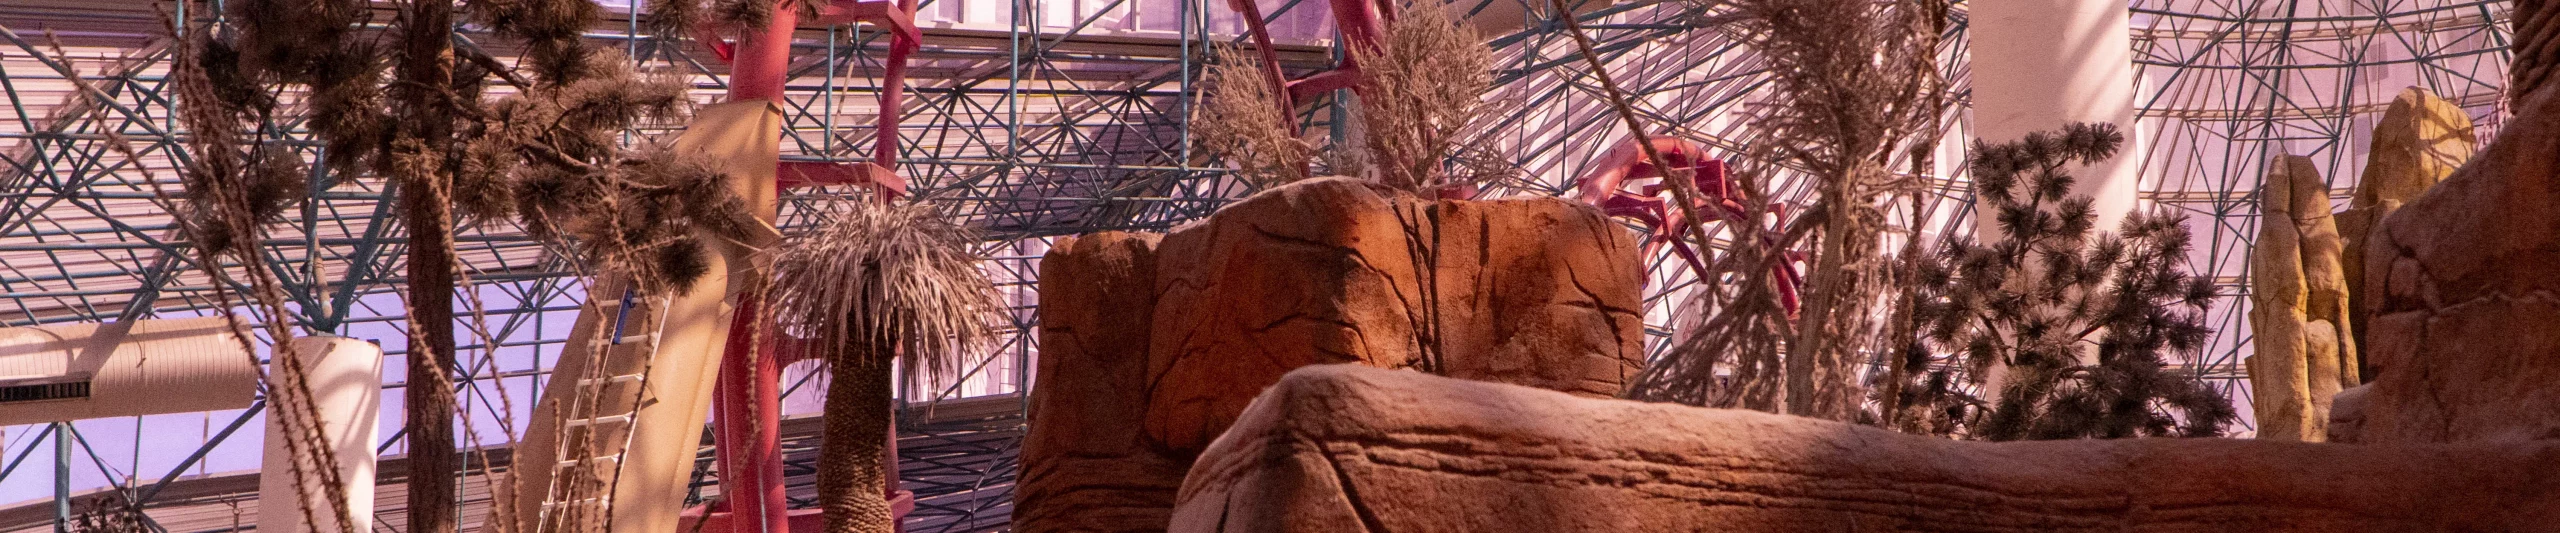 A visit to the Adventuredome